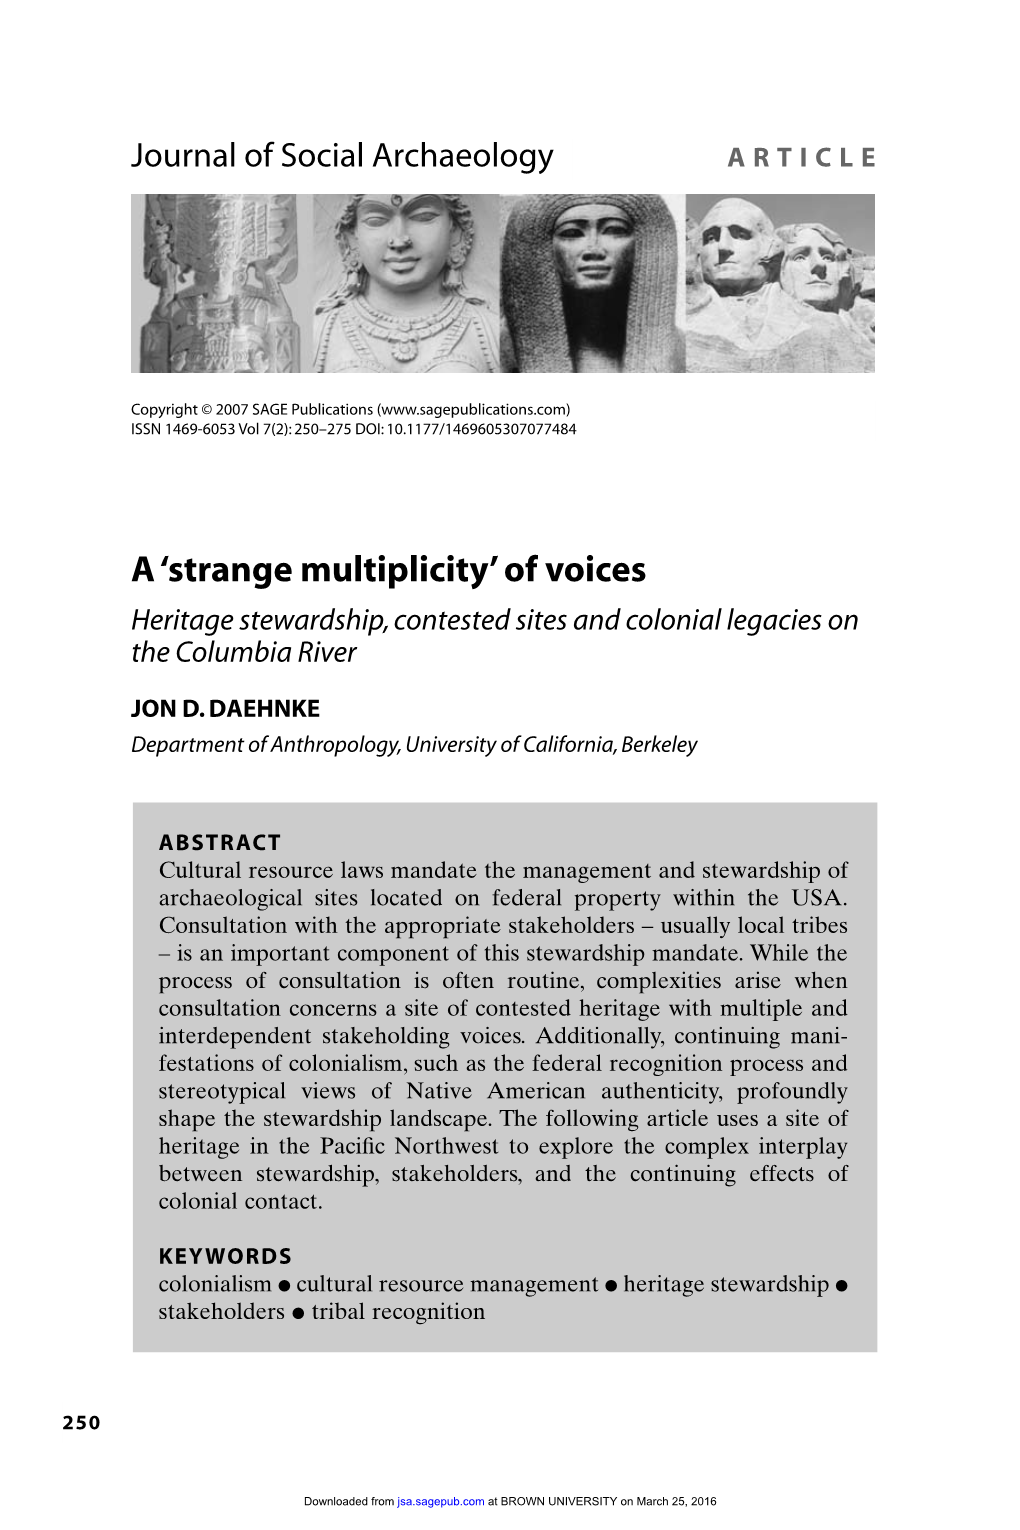 A 'Strange Multiplicity' of Voices